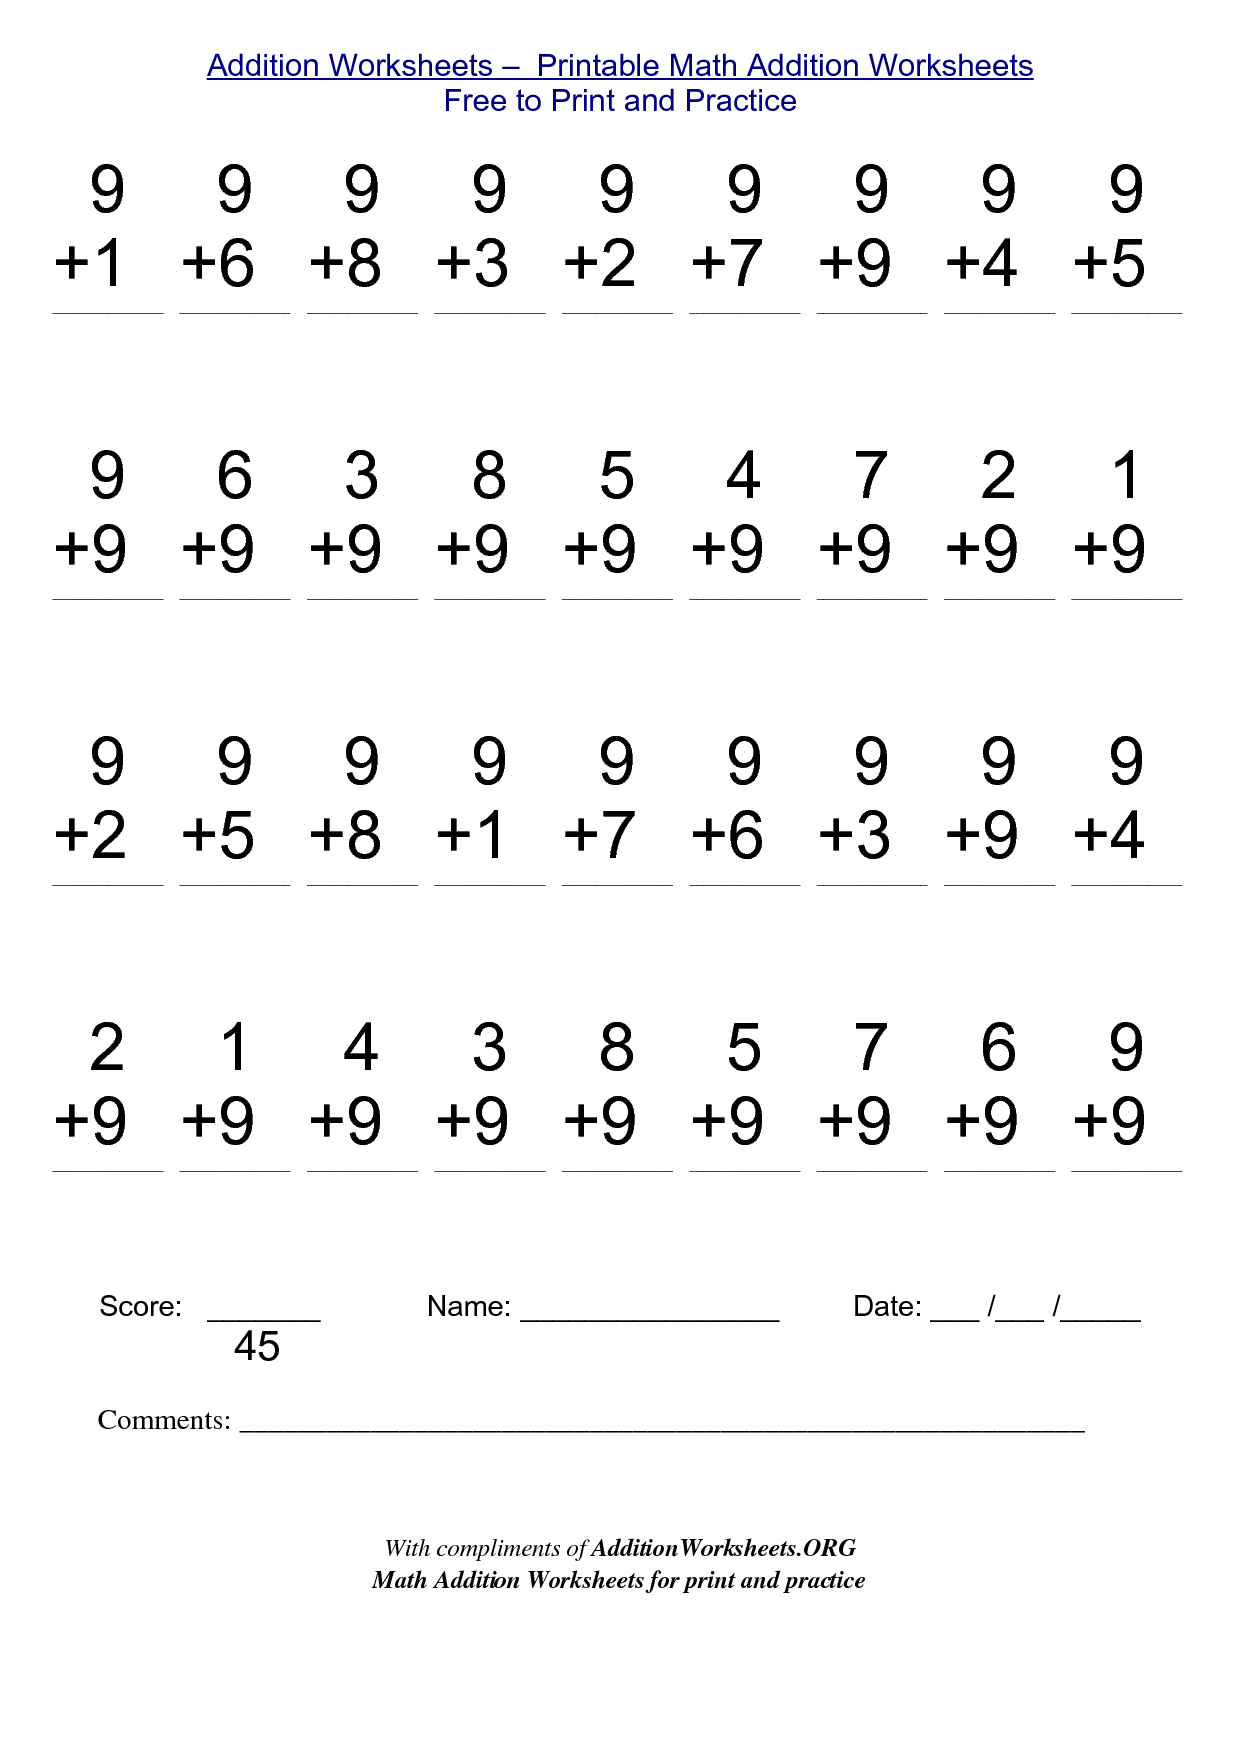 Math Worksheets For Free To Print - Alot | Me | Kindergarten | Free Printable Math Worksheets For Adults